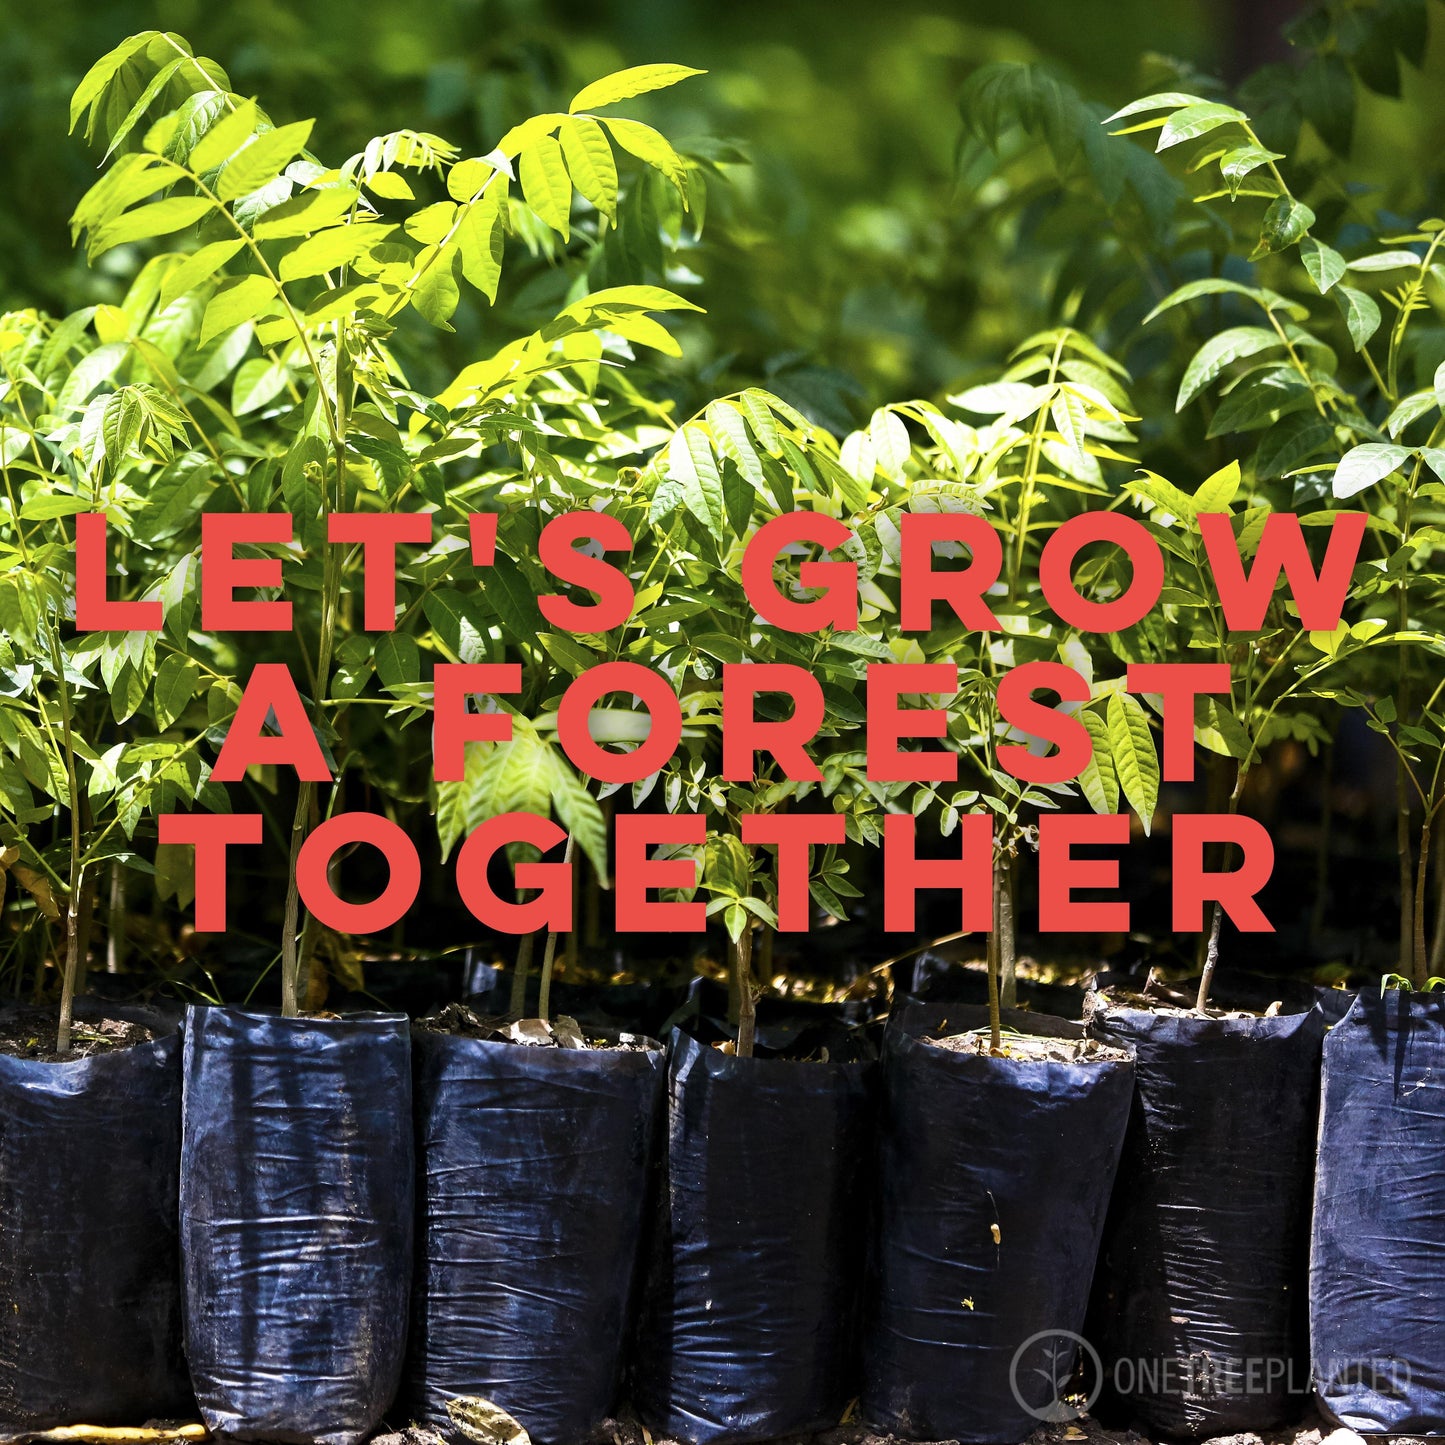 Tree to be Planted - Plant a Tree with One Tree Planted